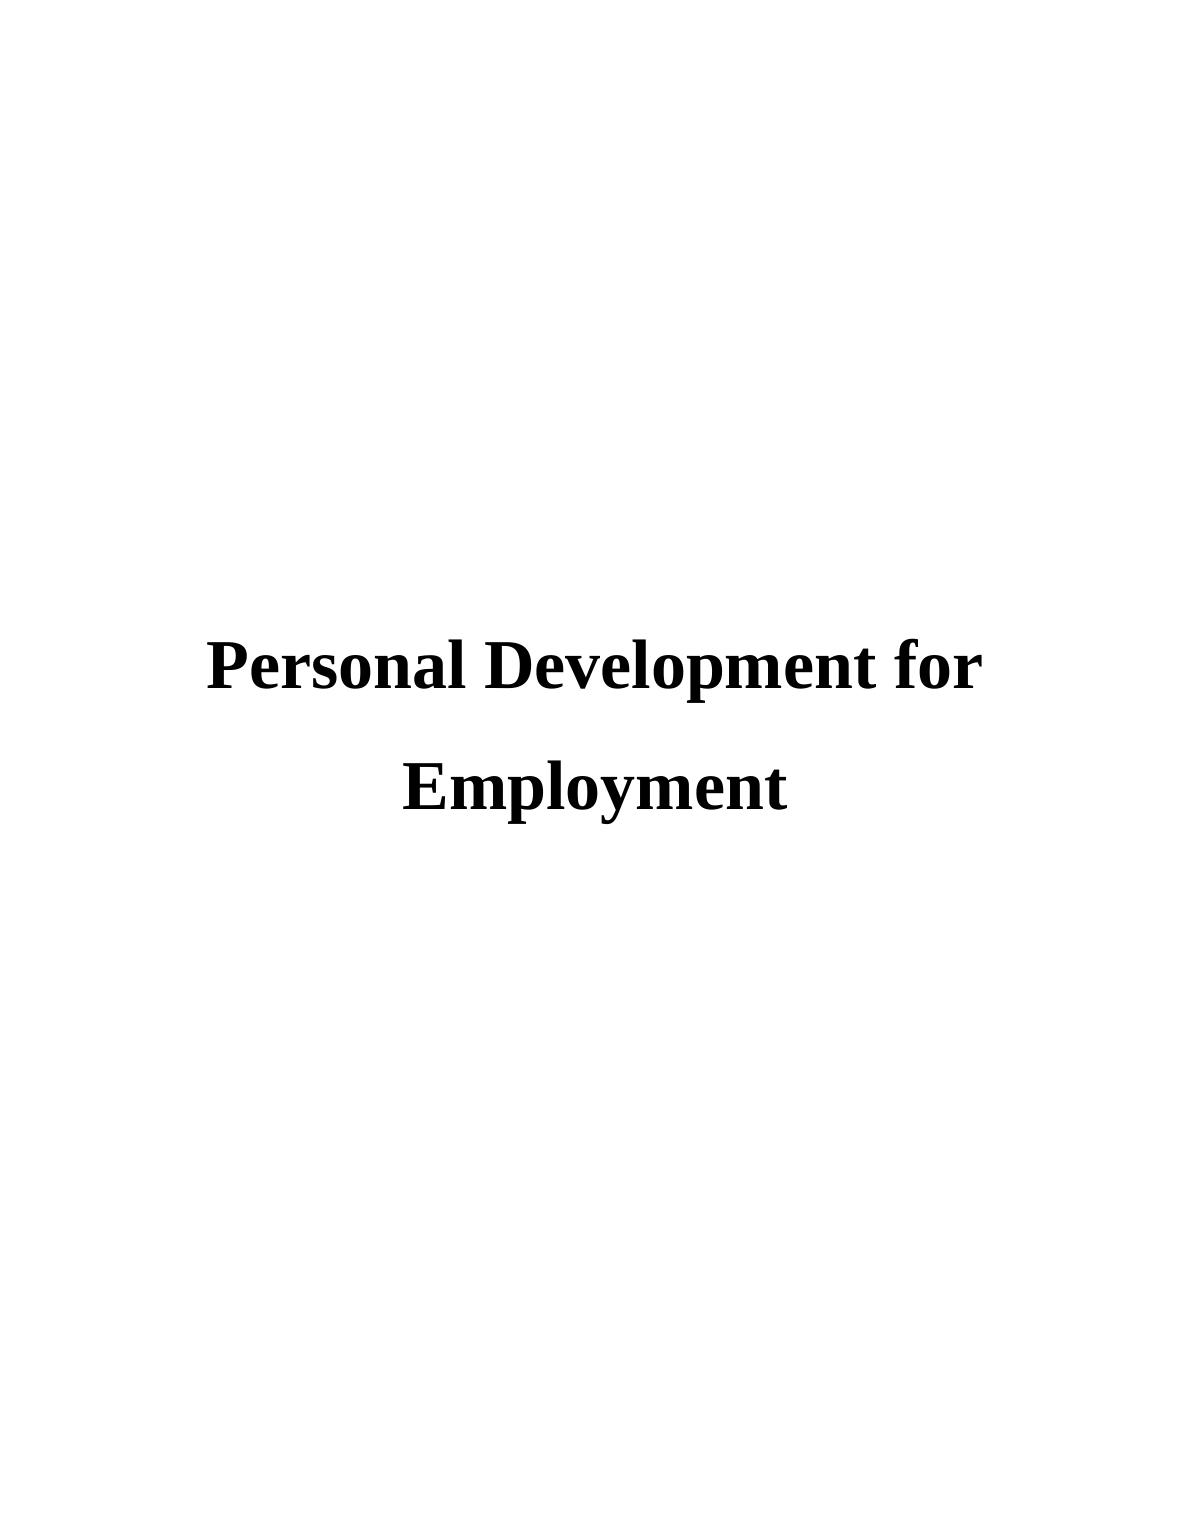 Report on Personal Development for Employment_1